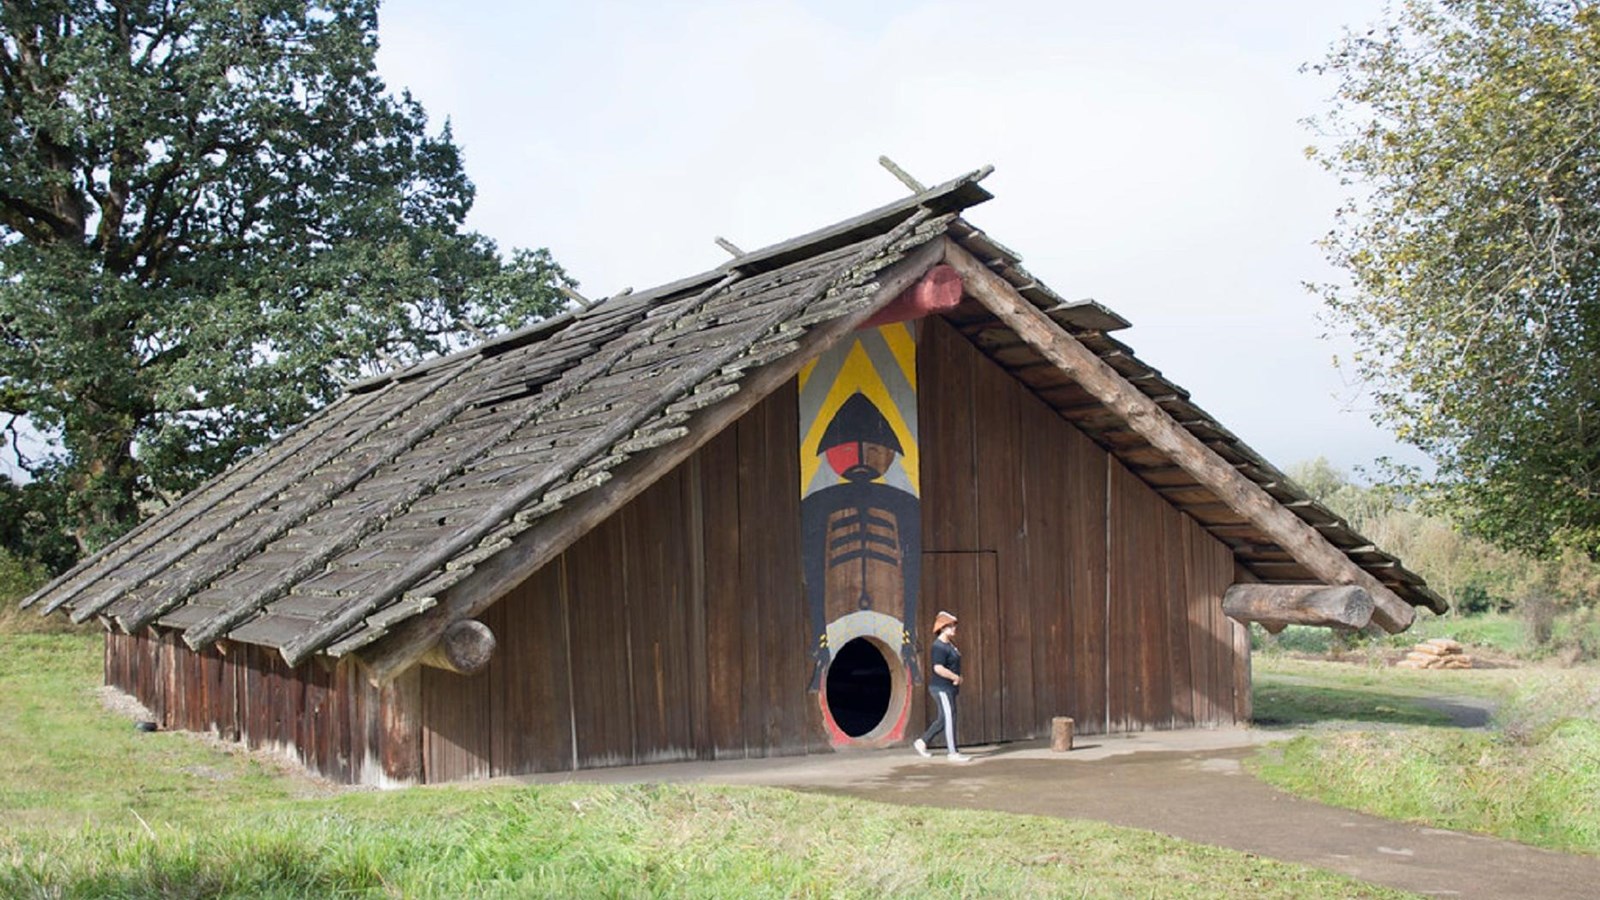 A low building made of cedar planks with a small round door sits in a field of green grass